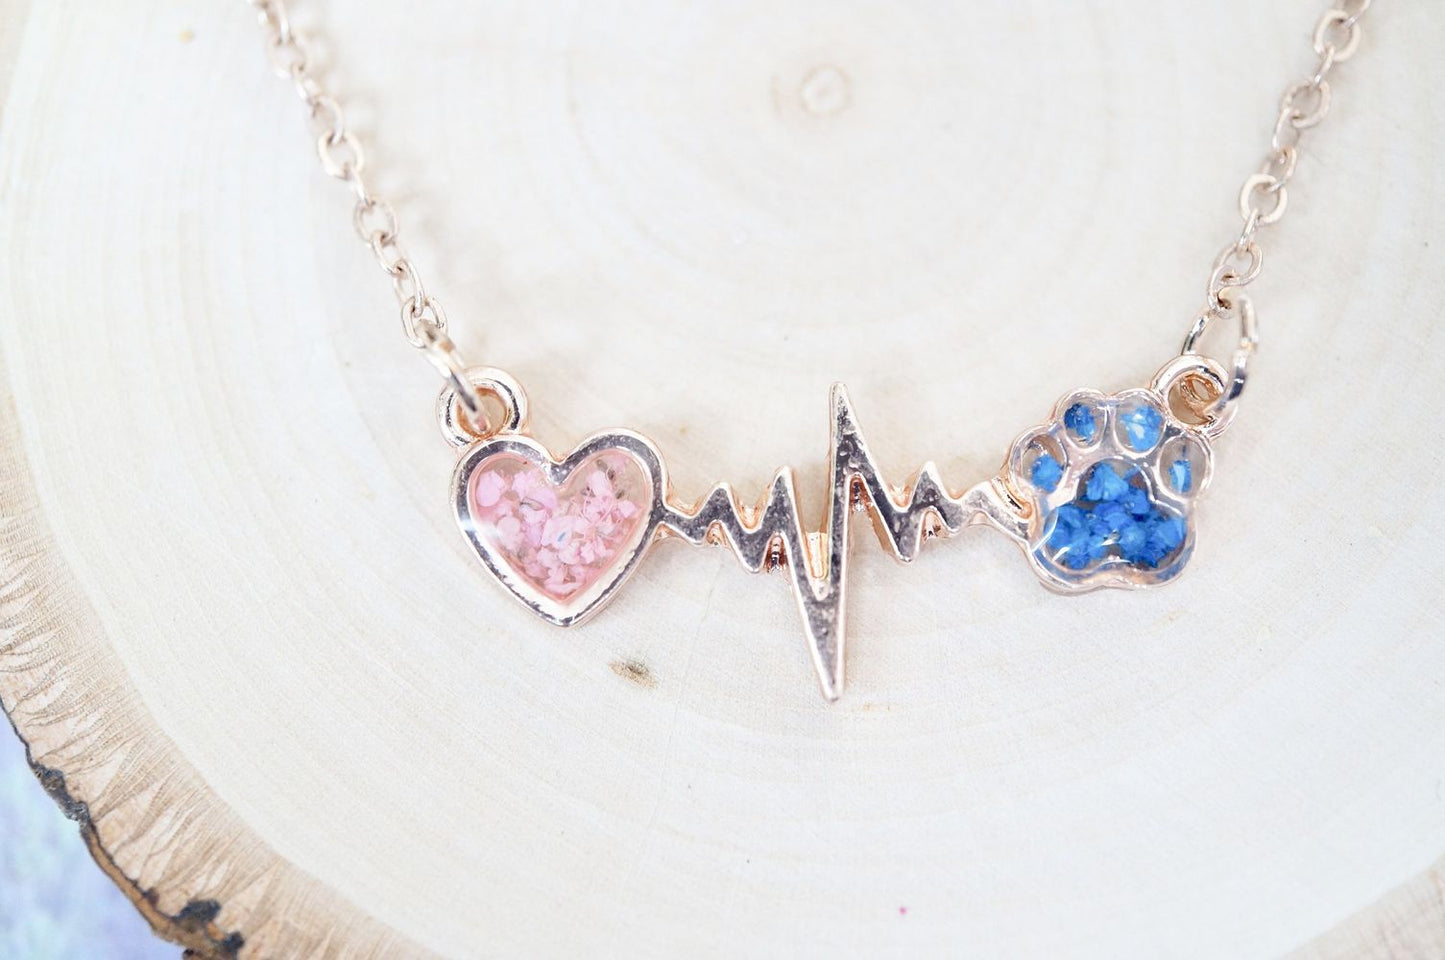 Real Pressed Flowers in Resin, Gold Dog Necklace in Blue and Pink